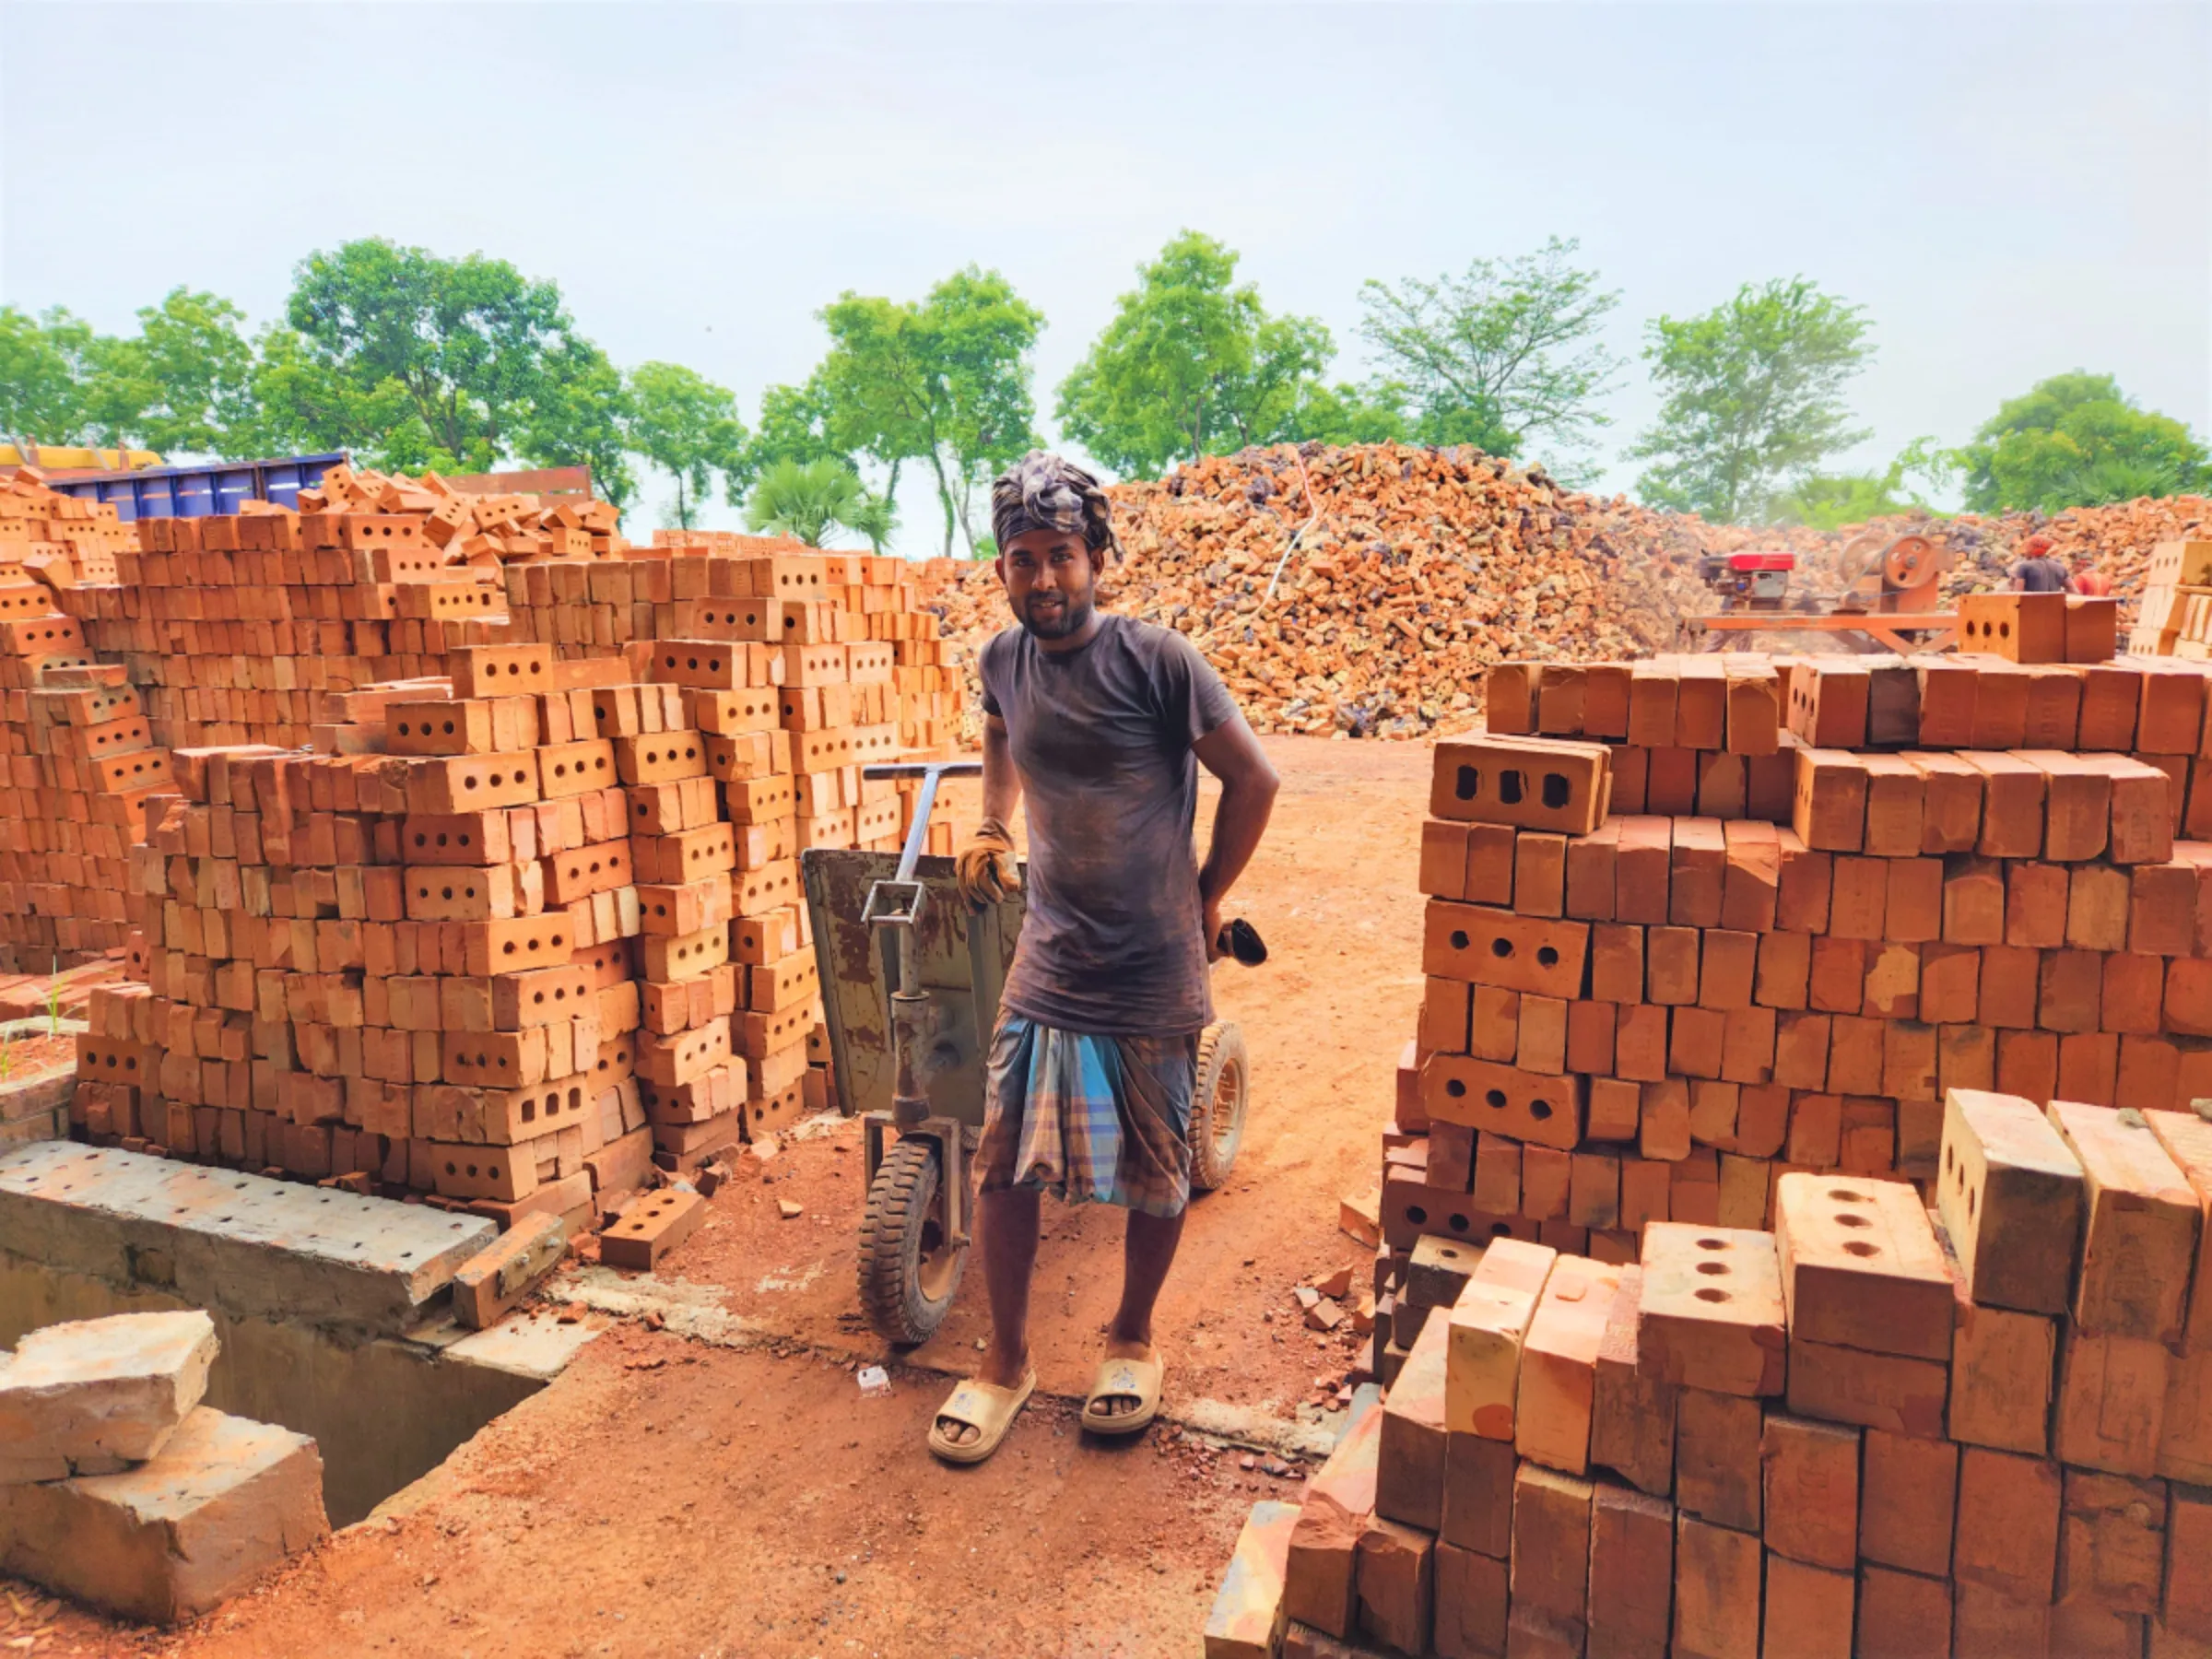 Worker Rafiqul Islam was carrying burned bricks at Banolata Bricks Refractory Ltd. When he started to work at Banolata he found everything was systematic, machine oriented and totally risk and dust free. Natore, Northern Bangladesh June 30, 2023